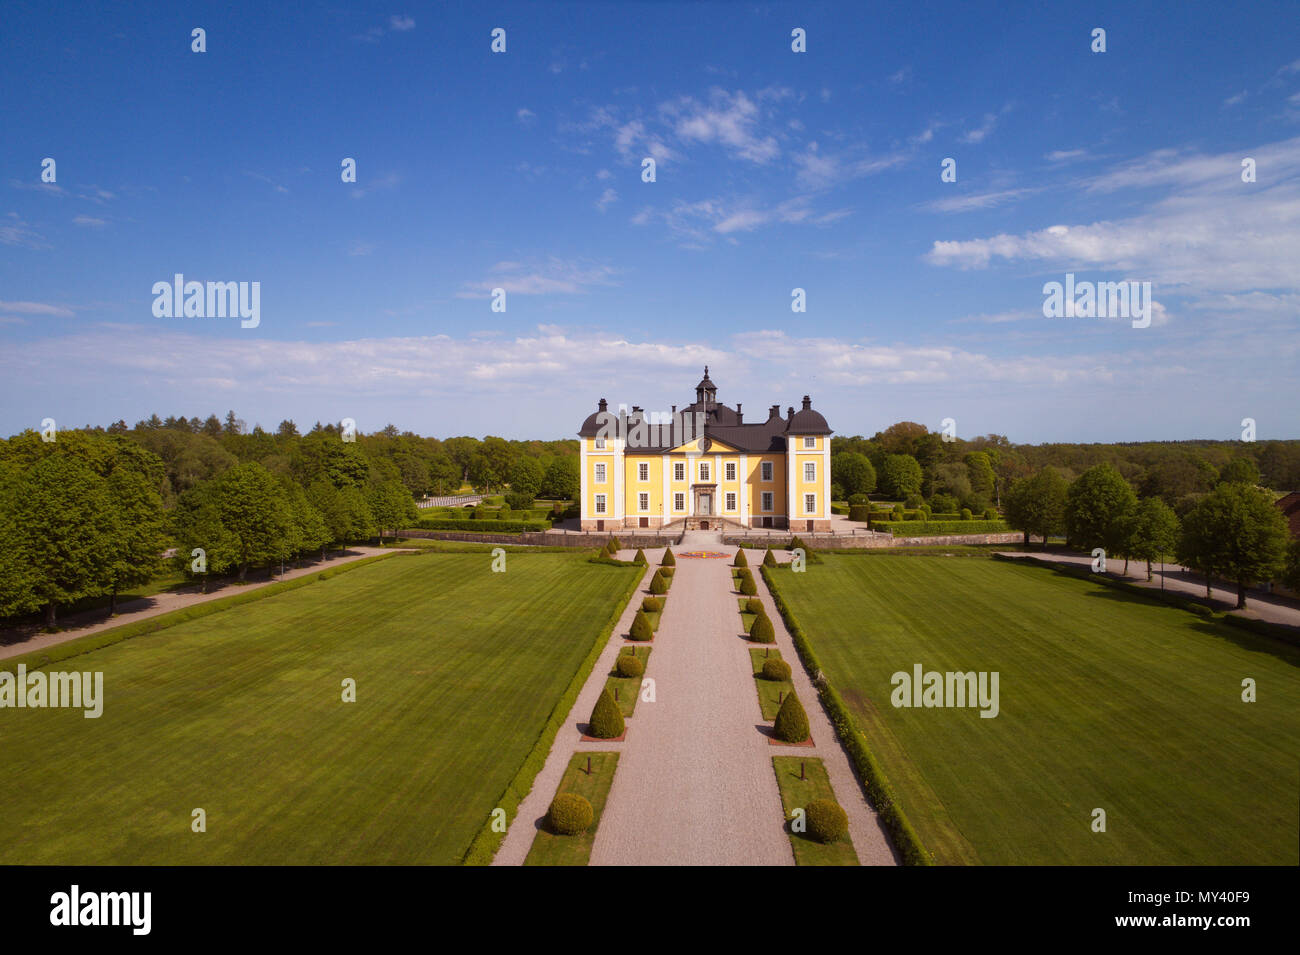 Aerial view of the Stromsholm castle located in the Swedish province of Vastmanland. Stock Photo